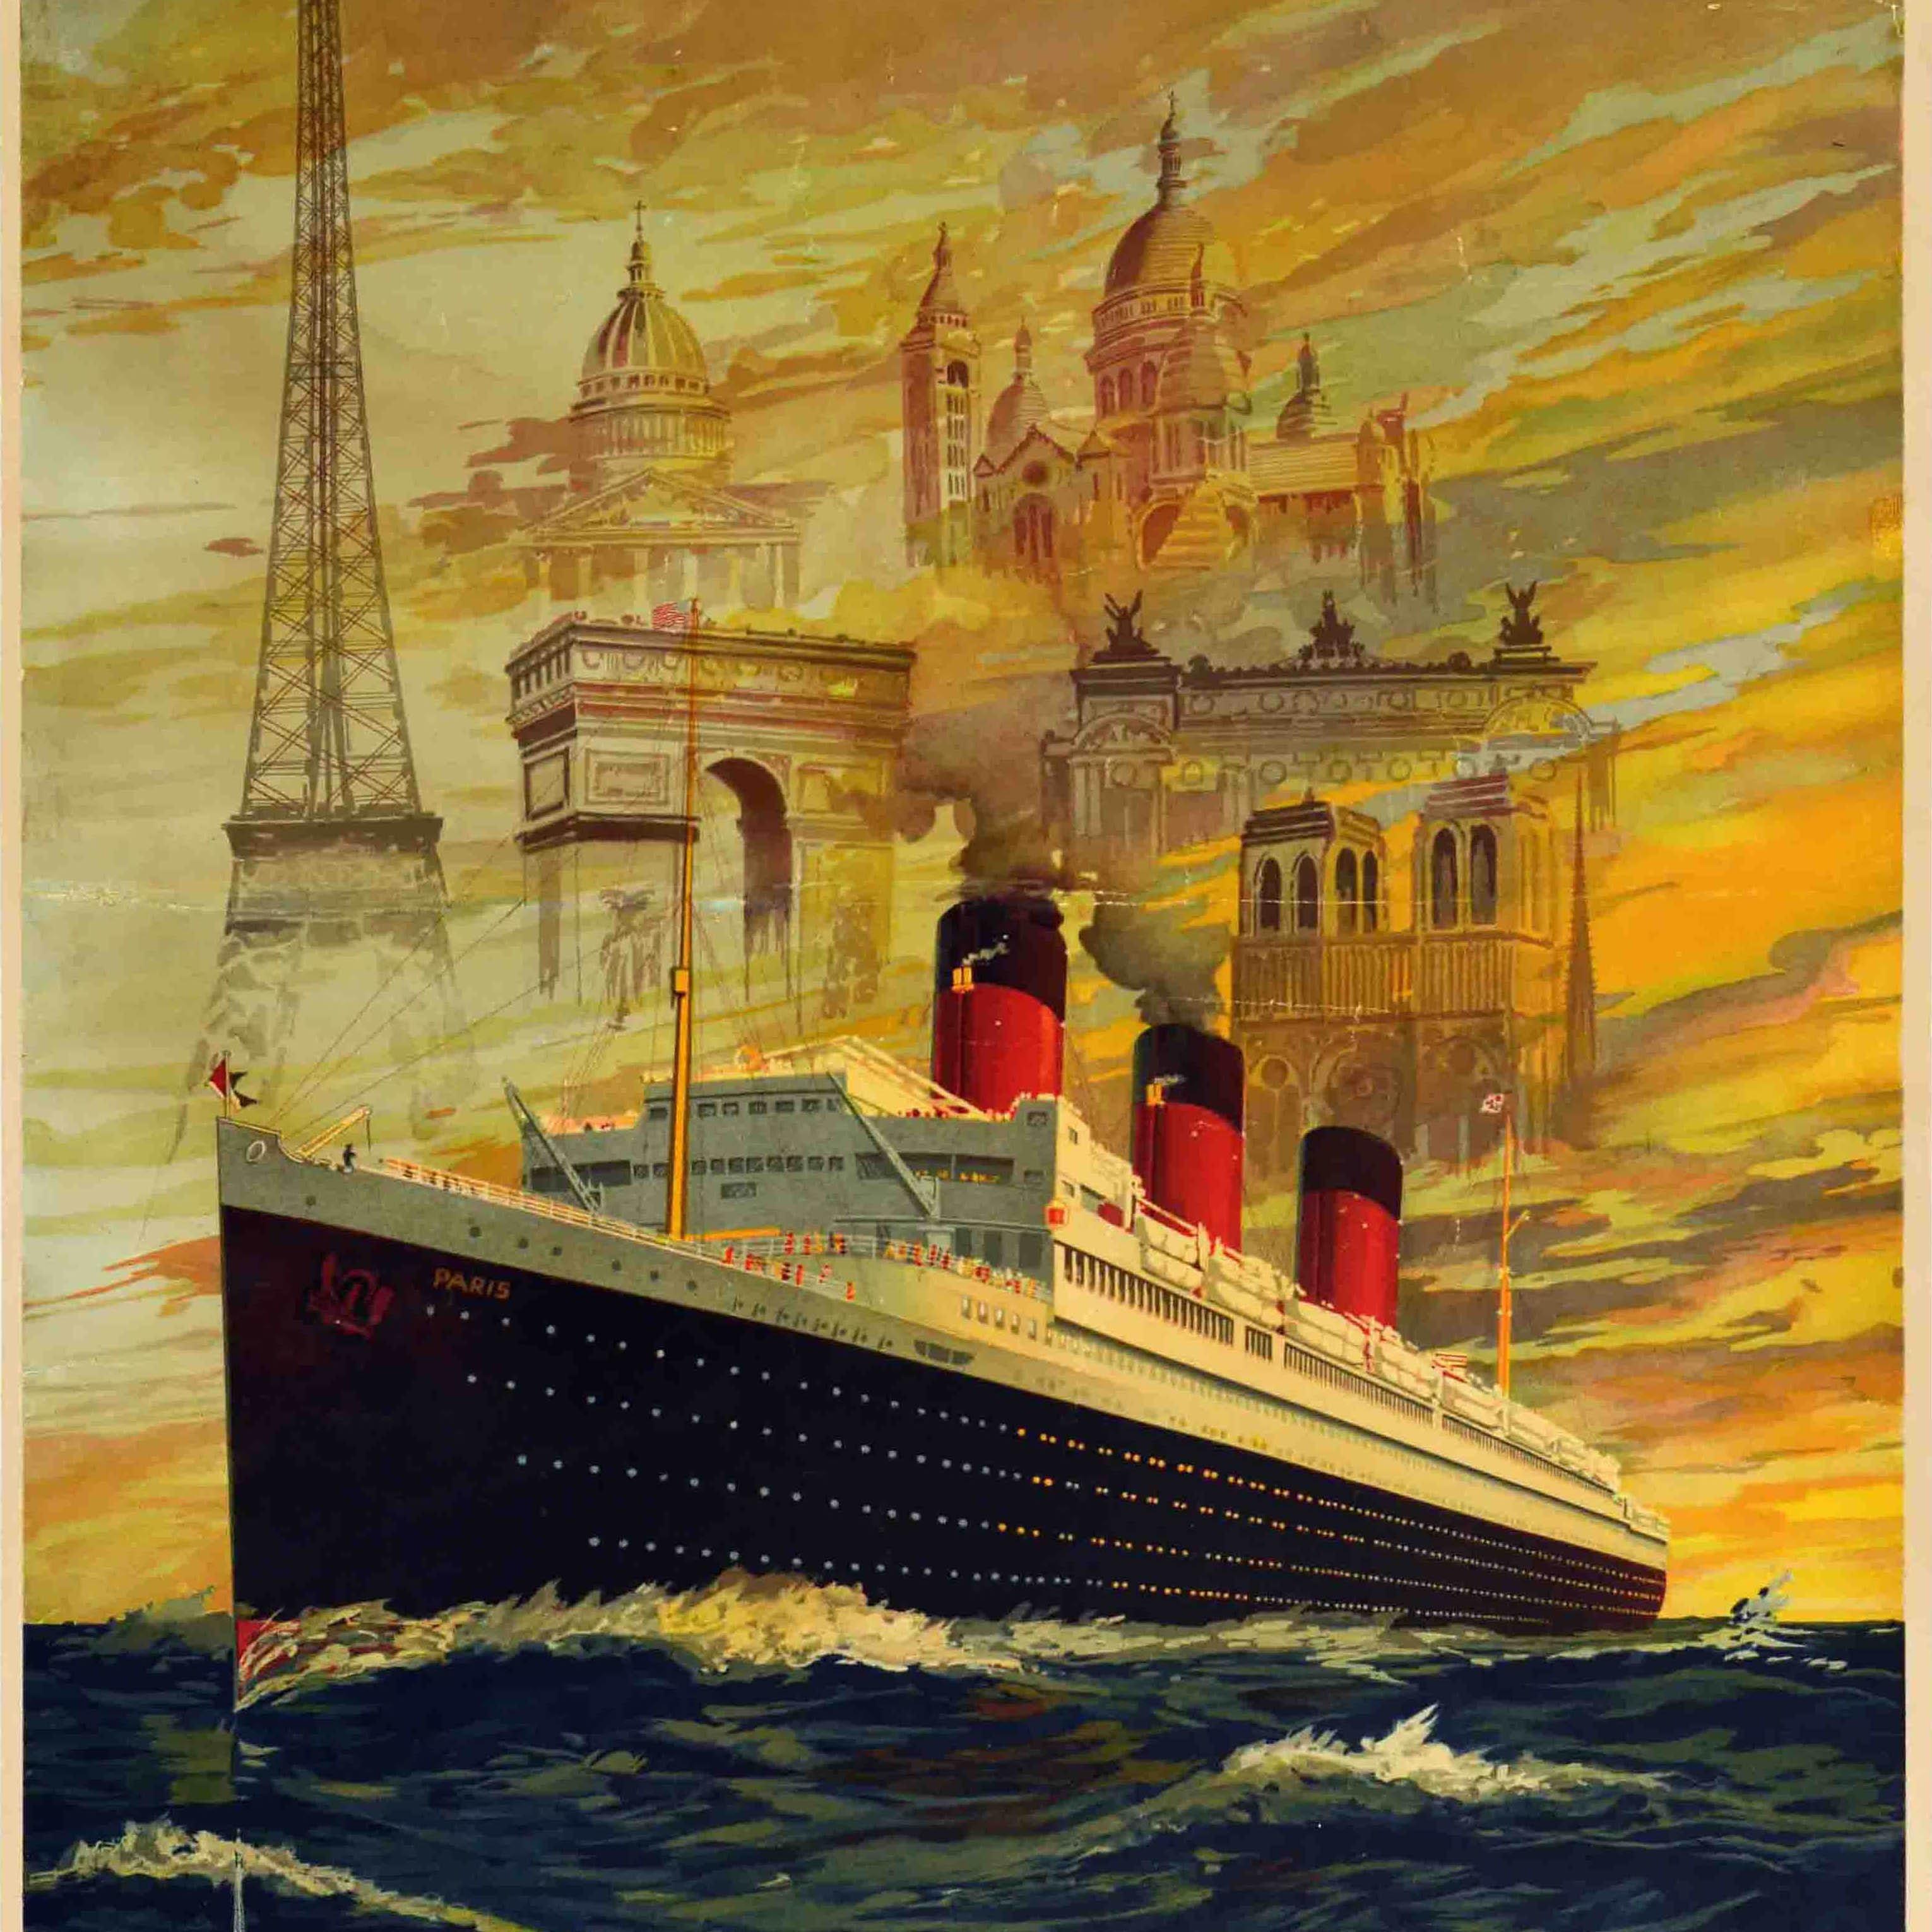 Original vintage cruise travel poster - Paris all the way to Europe When you board any French Line ship you step right into Paris itself! French Line CGT Bits of France afloat. Stunning design featuring the SS Paris (launched 1916) ocean liner